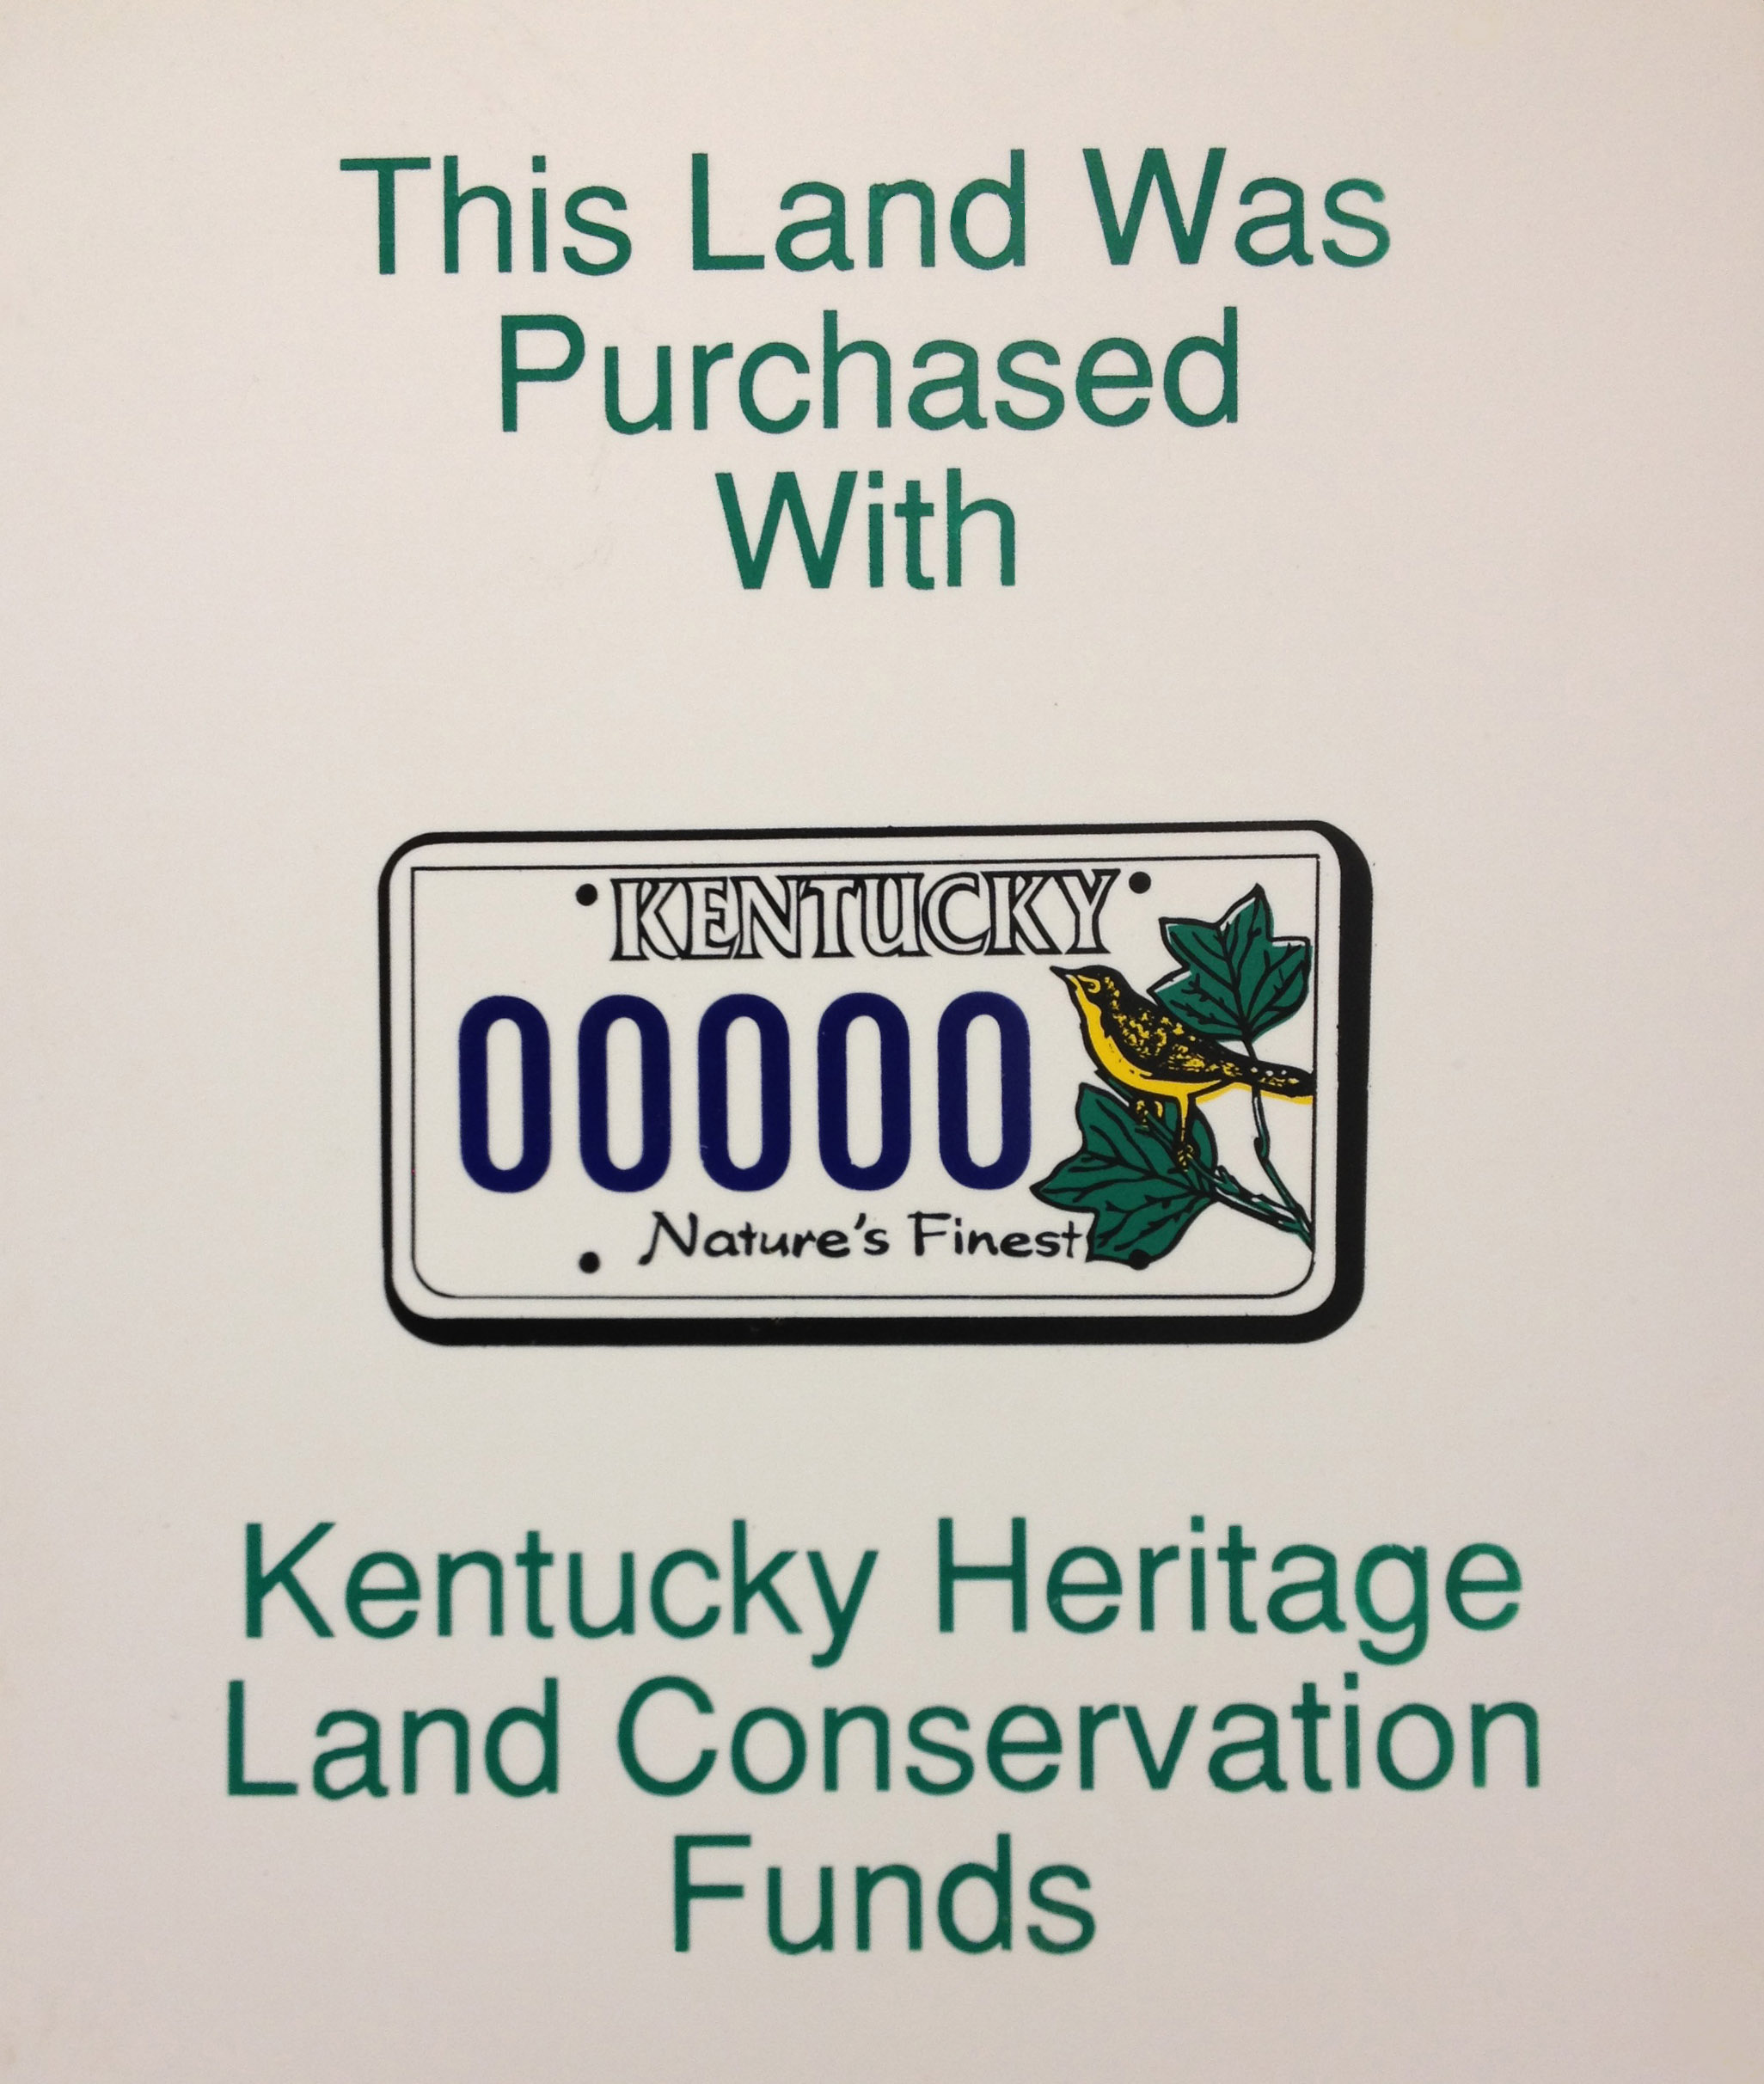 This land was purchased with Kentucky Heritage Land Conservation Funds